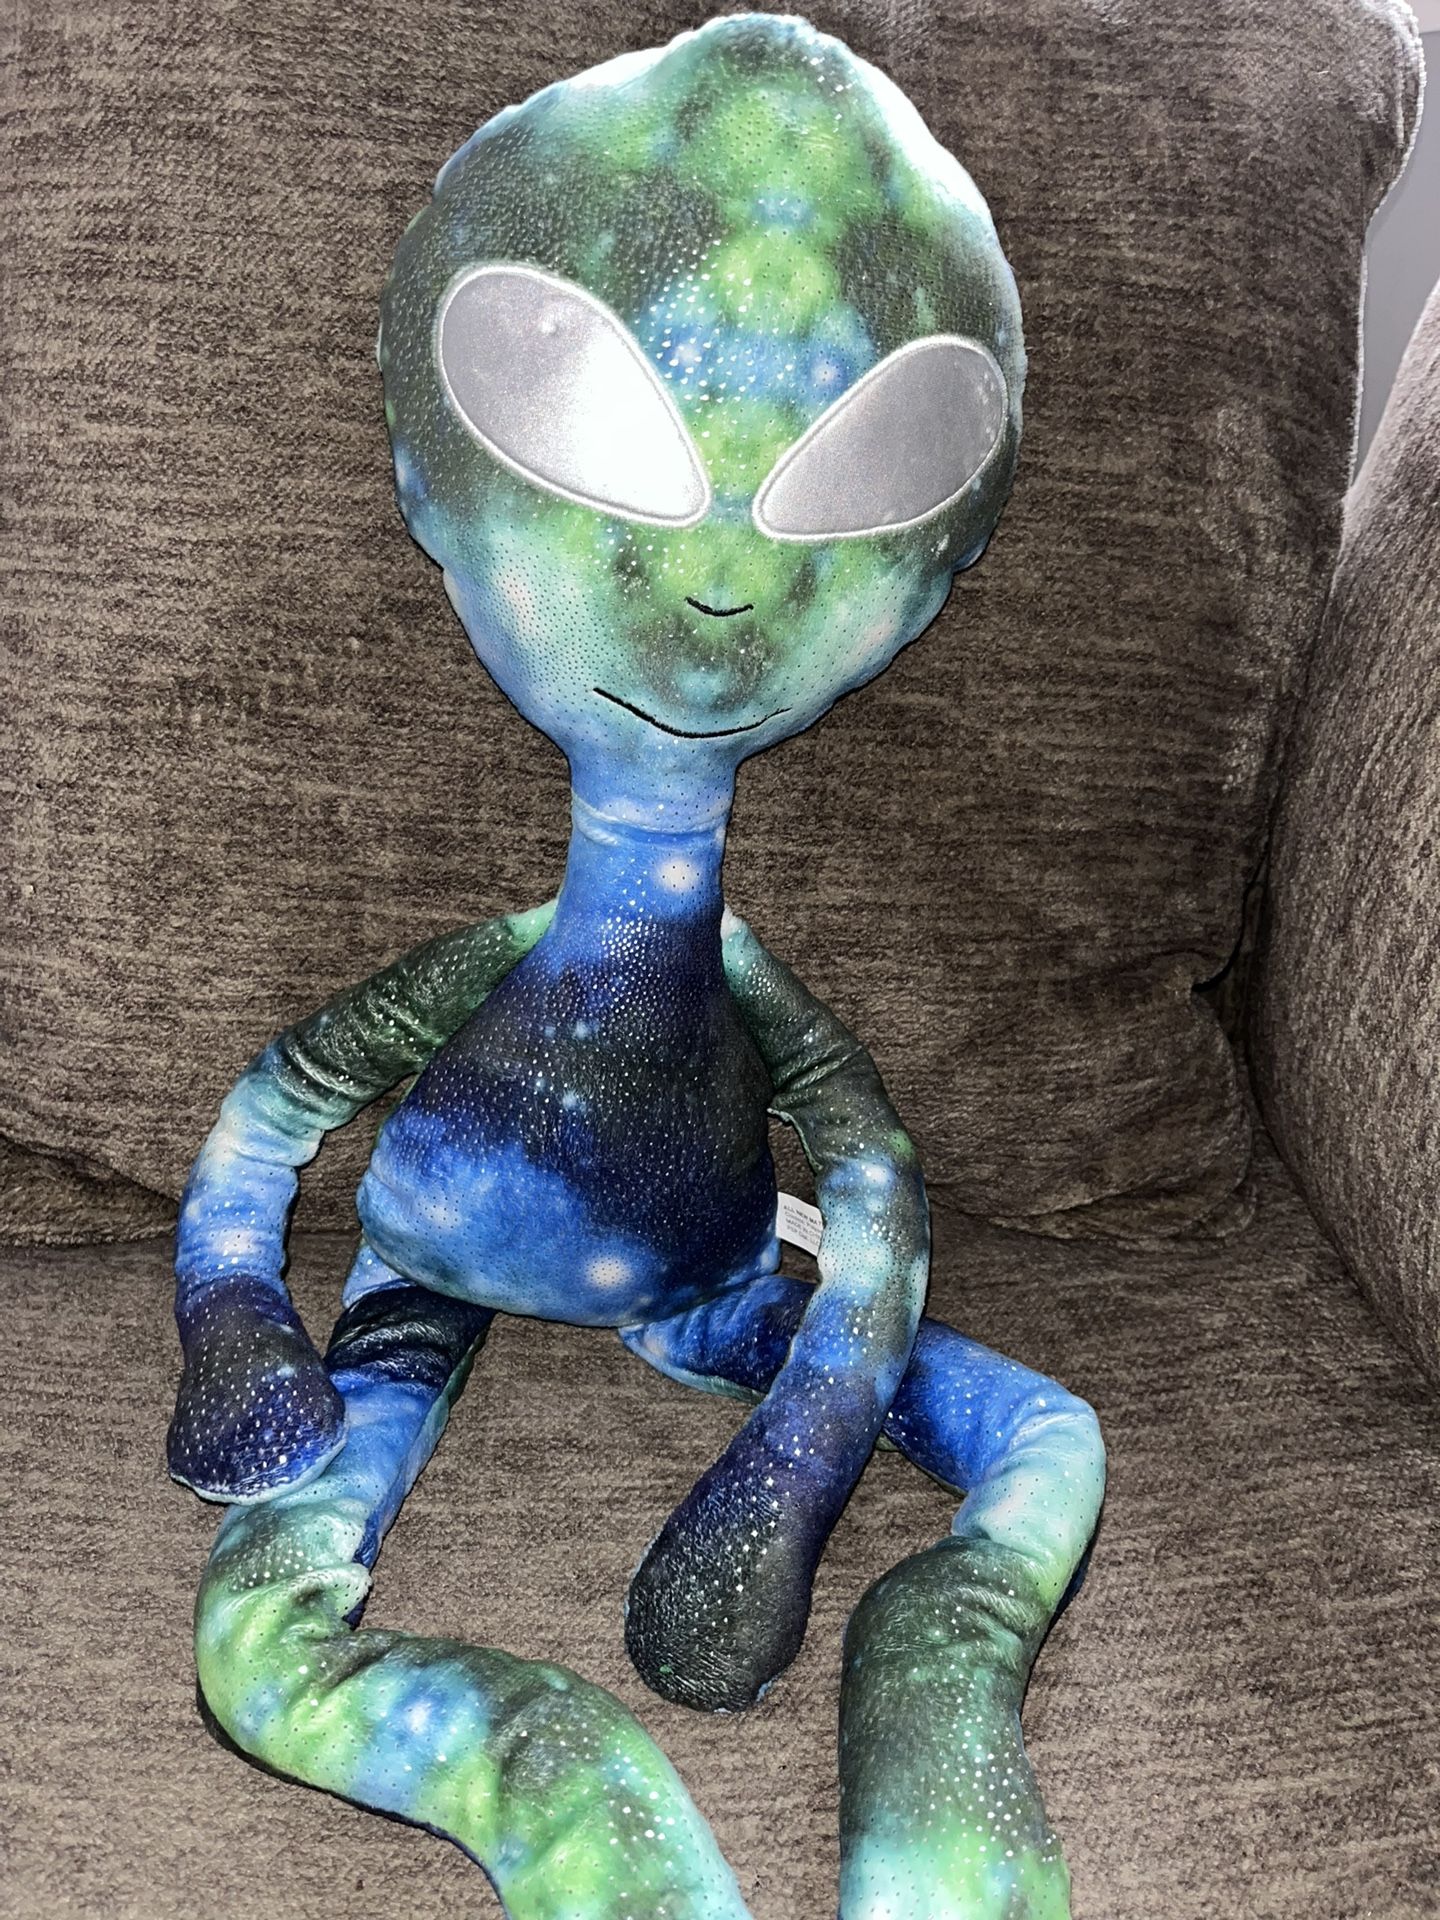 Very cool almost 30inch galactic alien plush